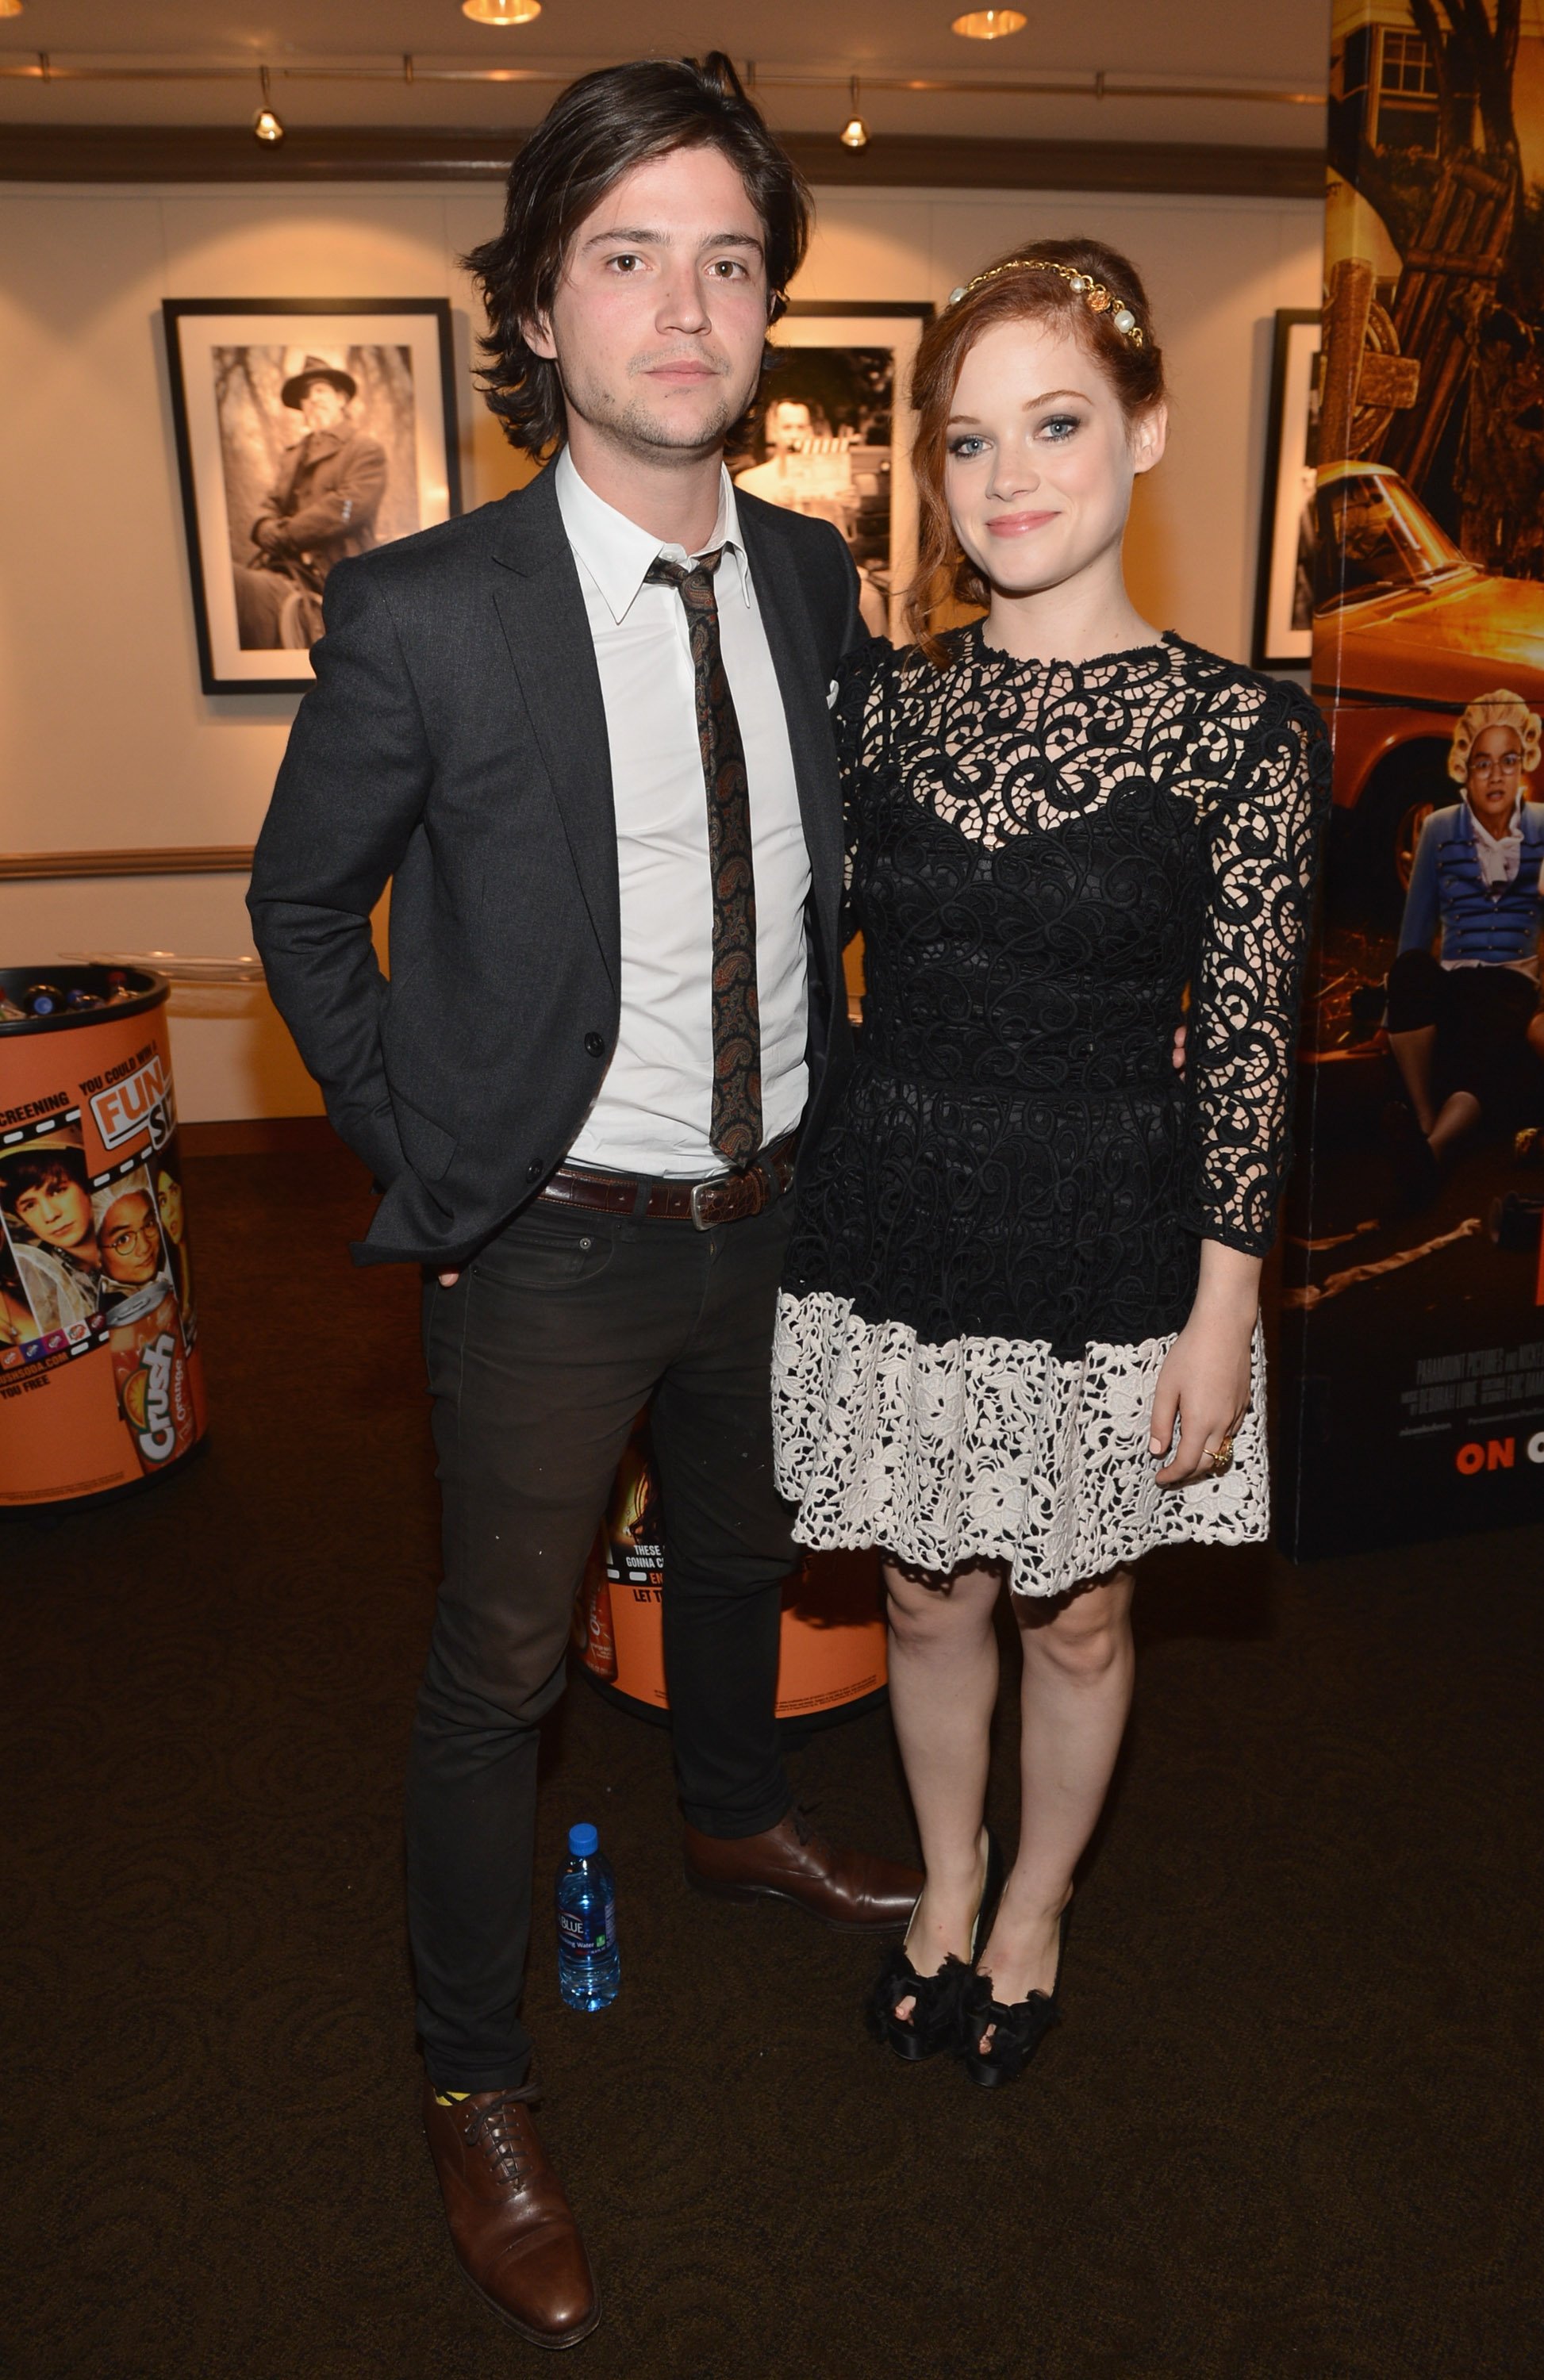 Thomas McDonell and Jane Levy arrive to the premiere of Paramount Pictures' "Fun Size" at Paramount Theater on the Paramount Studios lot on October 25, 2012 in Hollywood, California | Photo: Getty Images